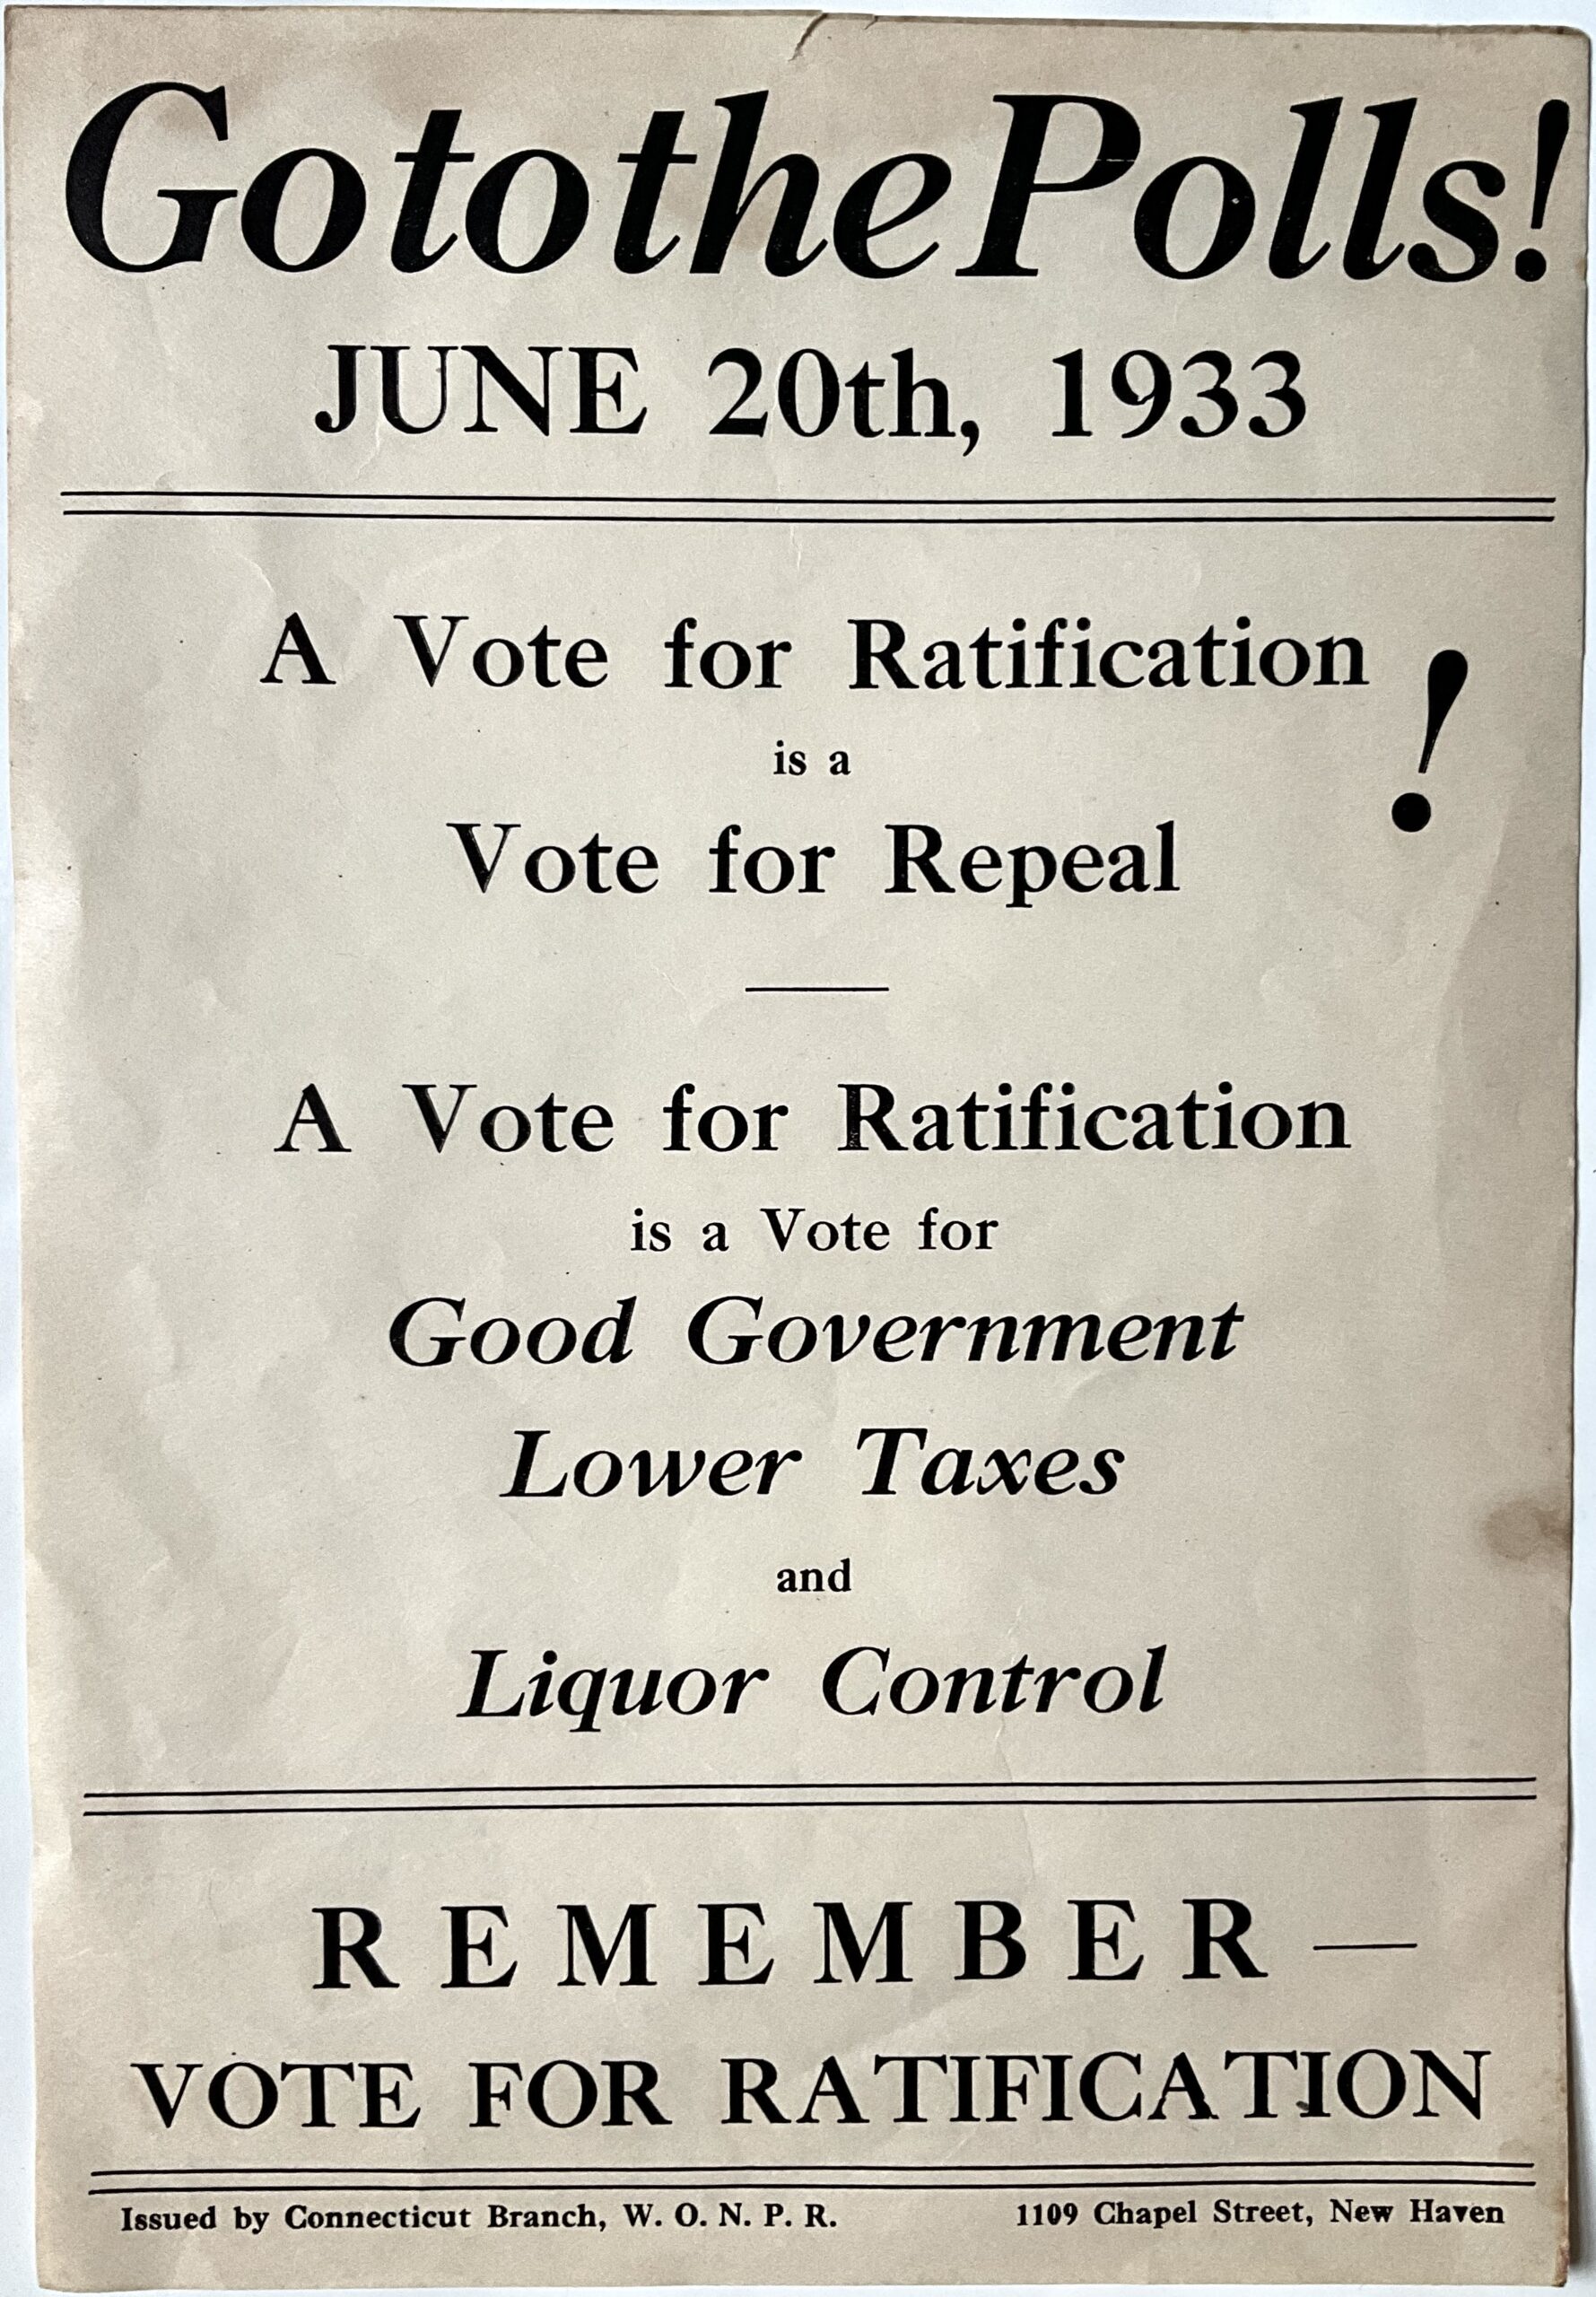 ST76	GO TO THE POLLS - JUNE 20, 1933